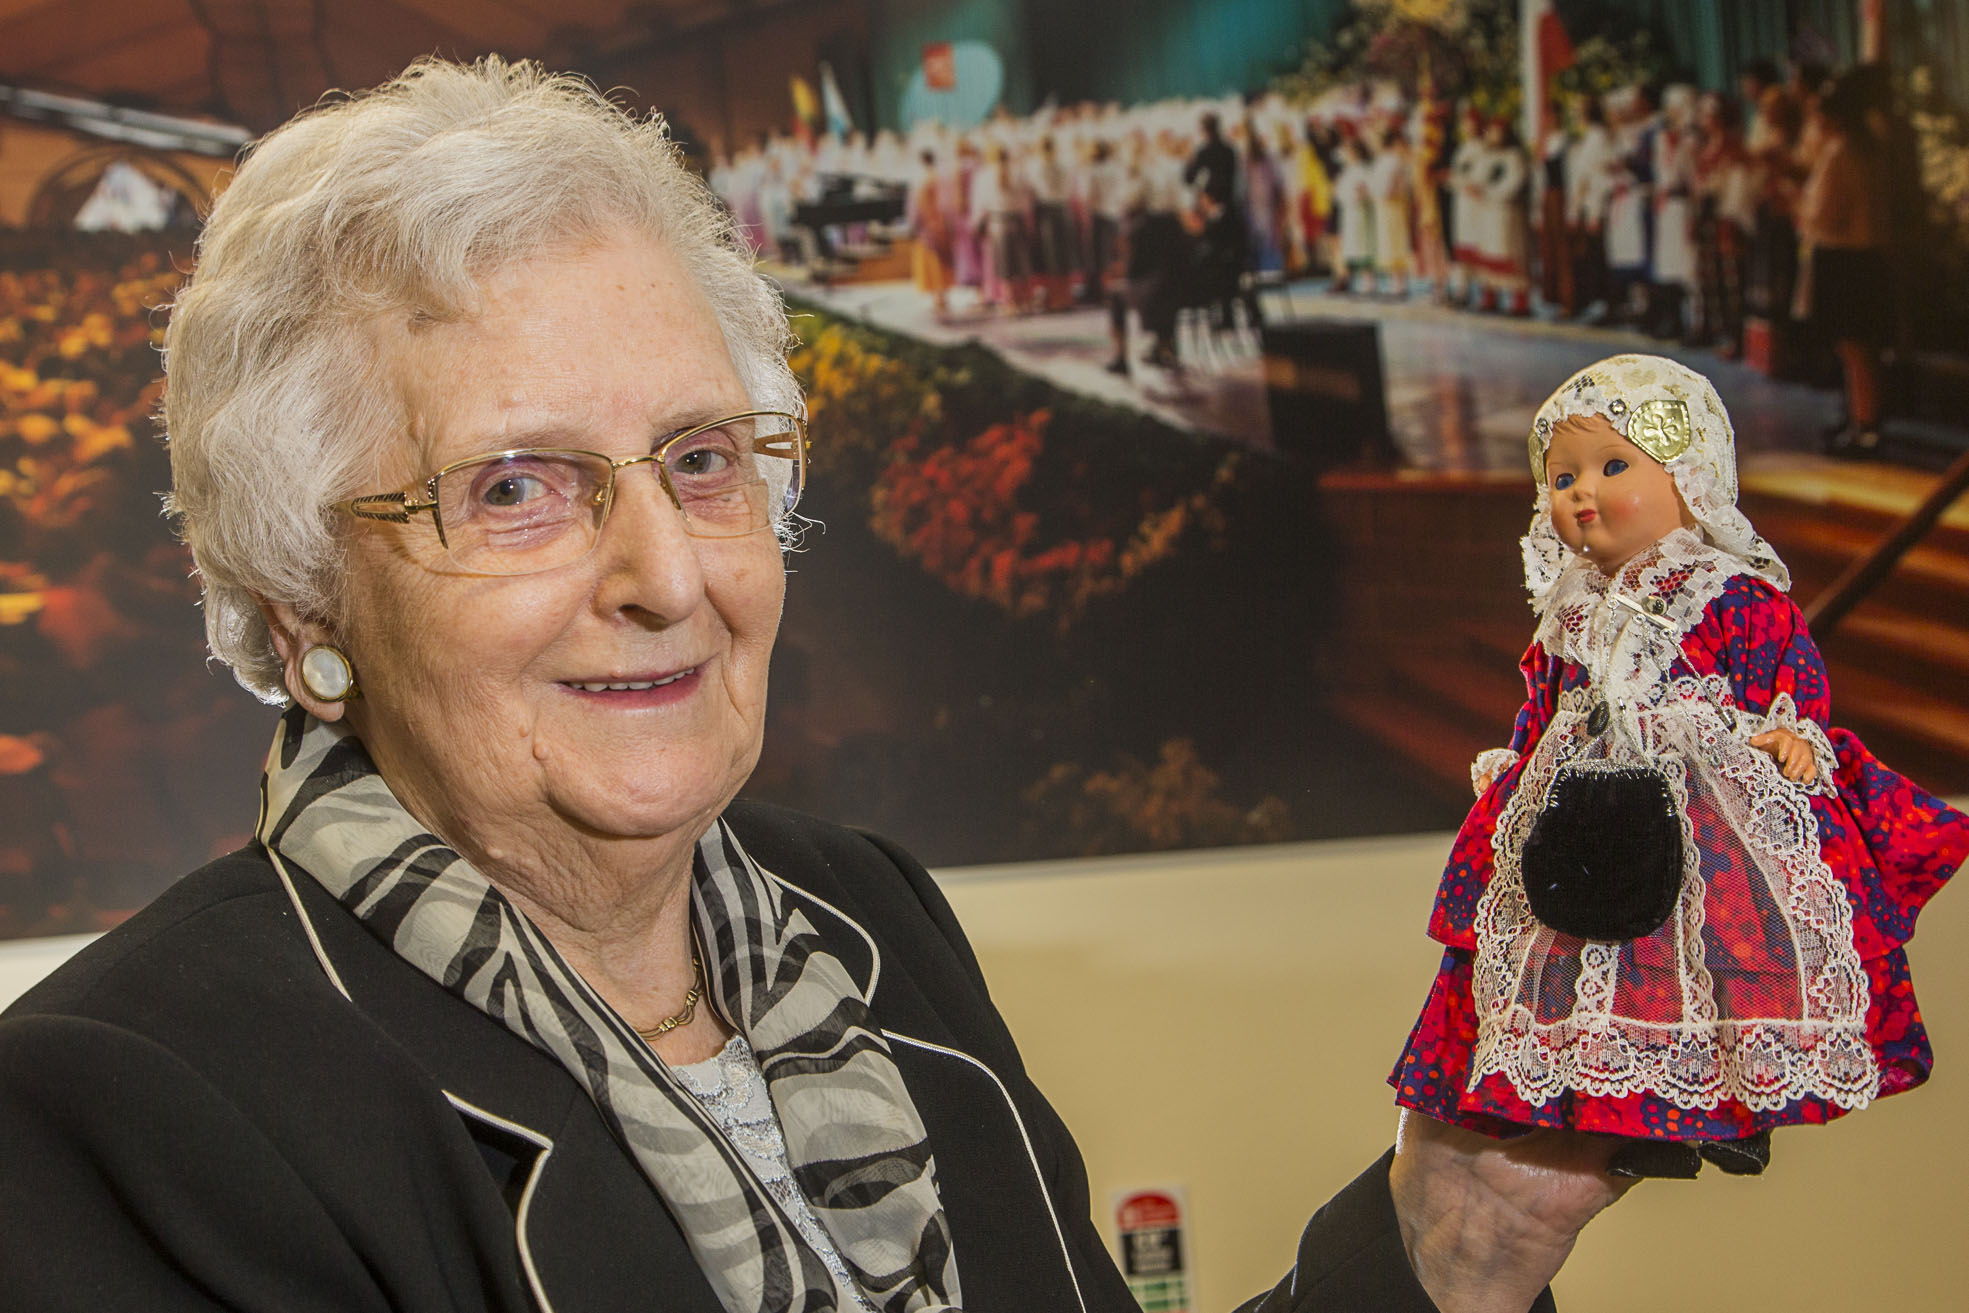 Betty recalls her 50 memorable years in hospitality for Llangollen Eisteddfod